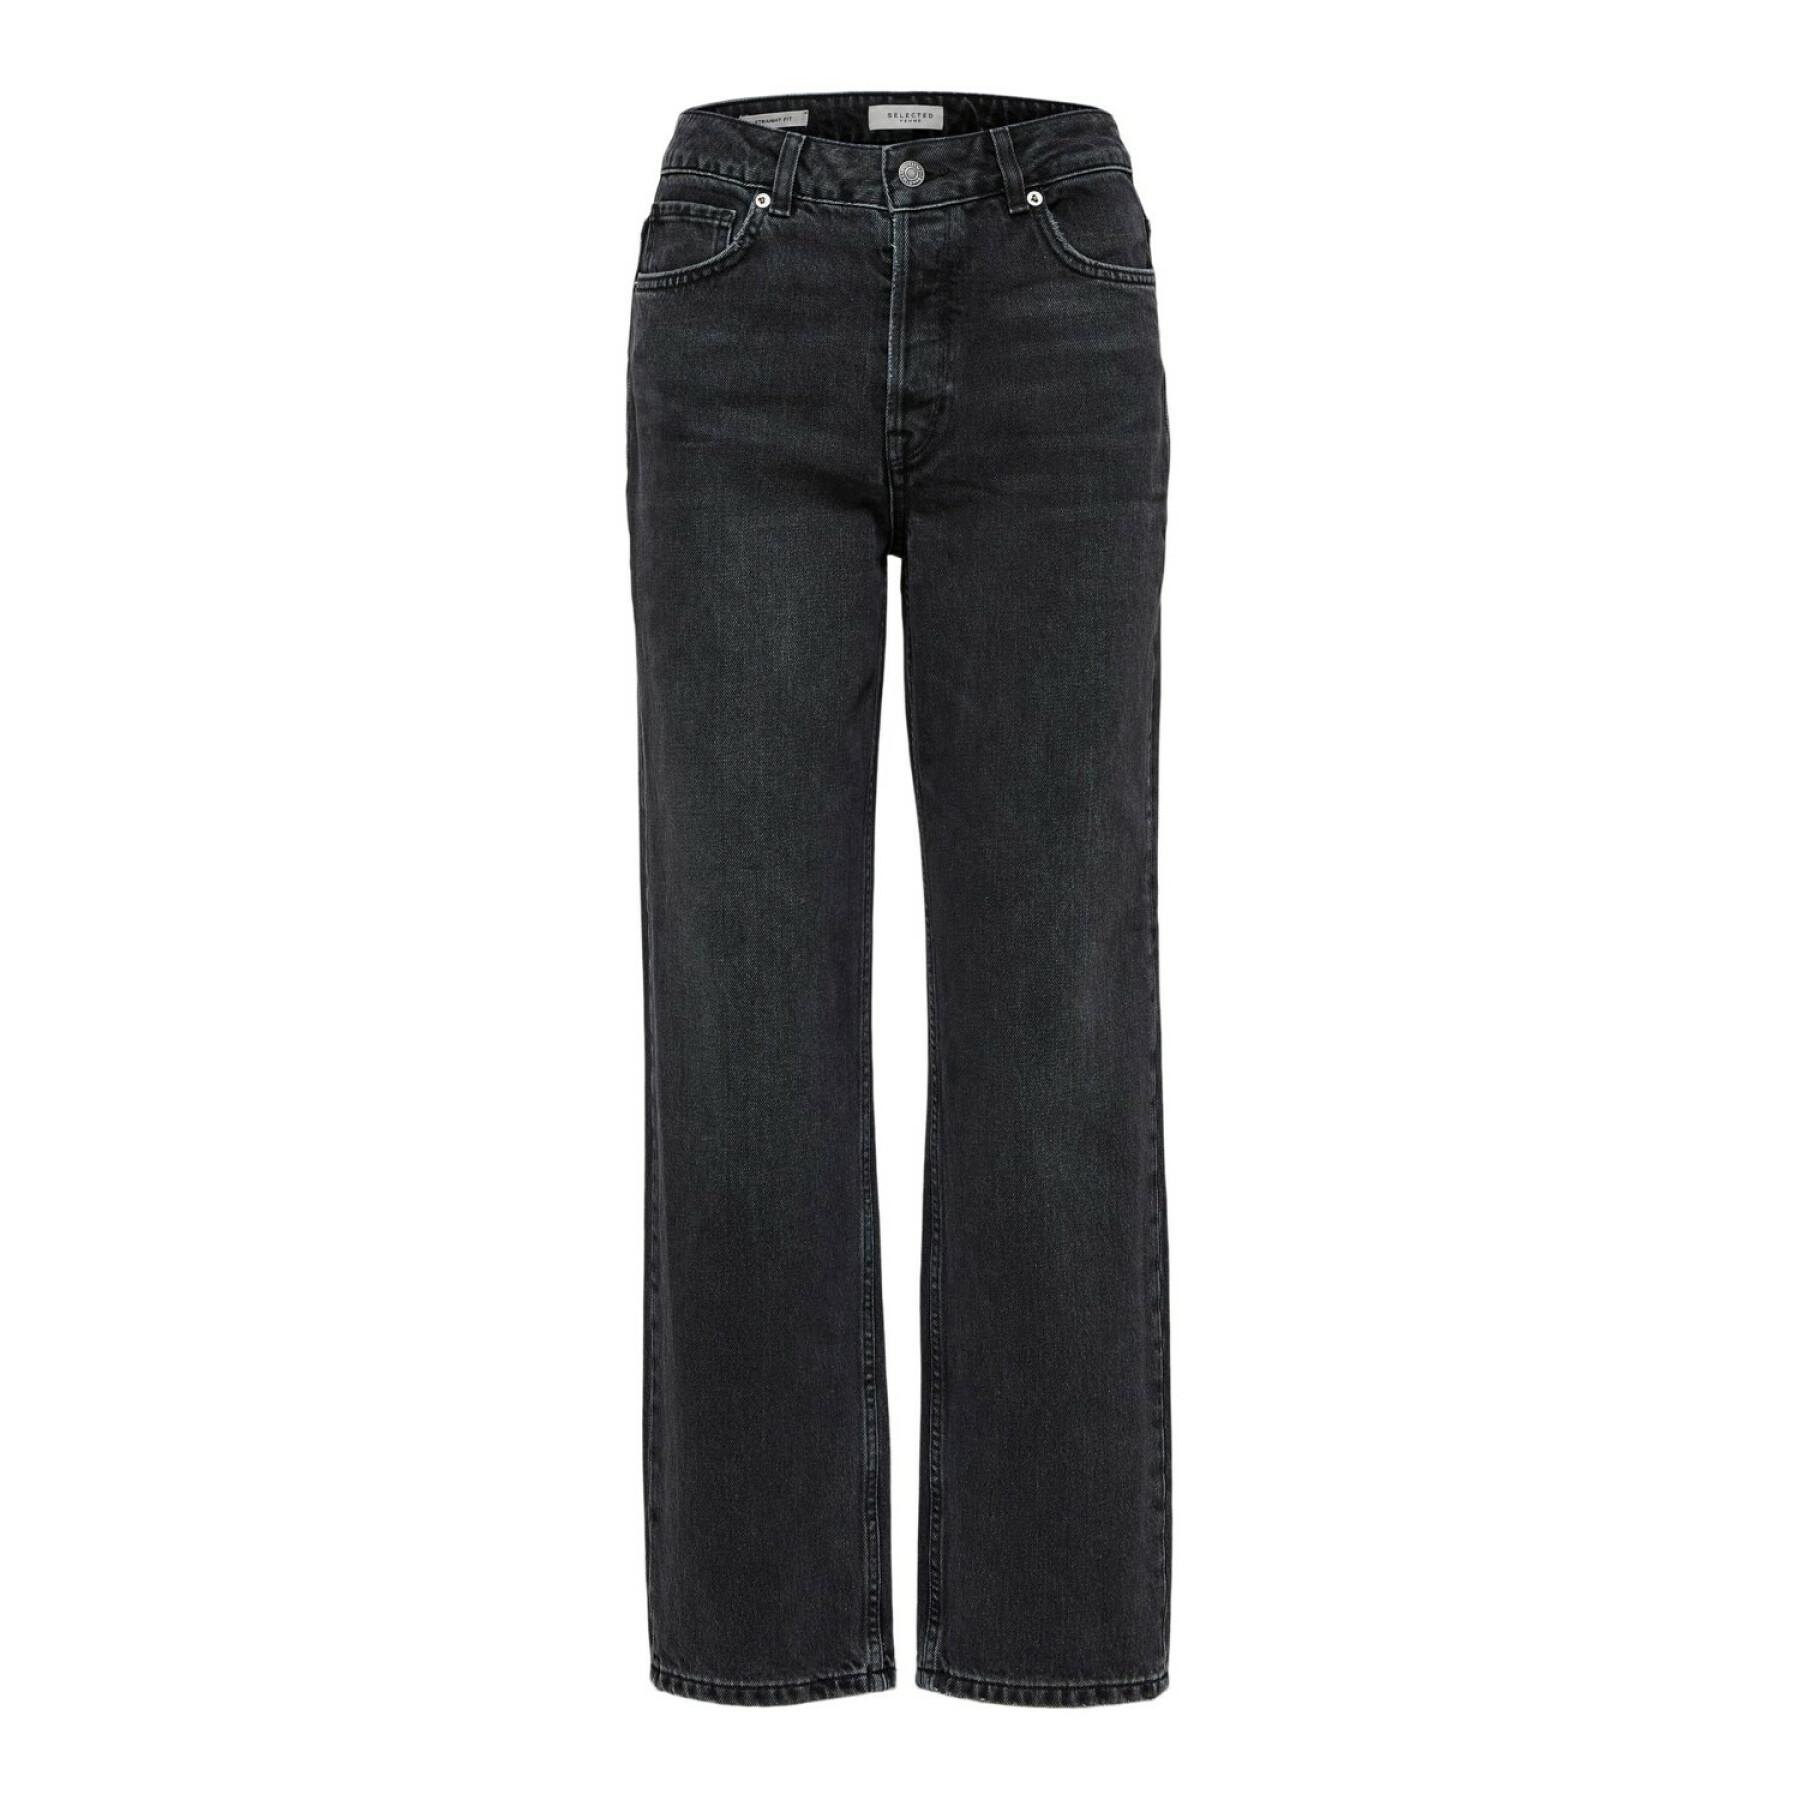 Damen Jeans mit hoher Taille gerade Selected Kate